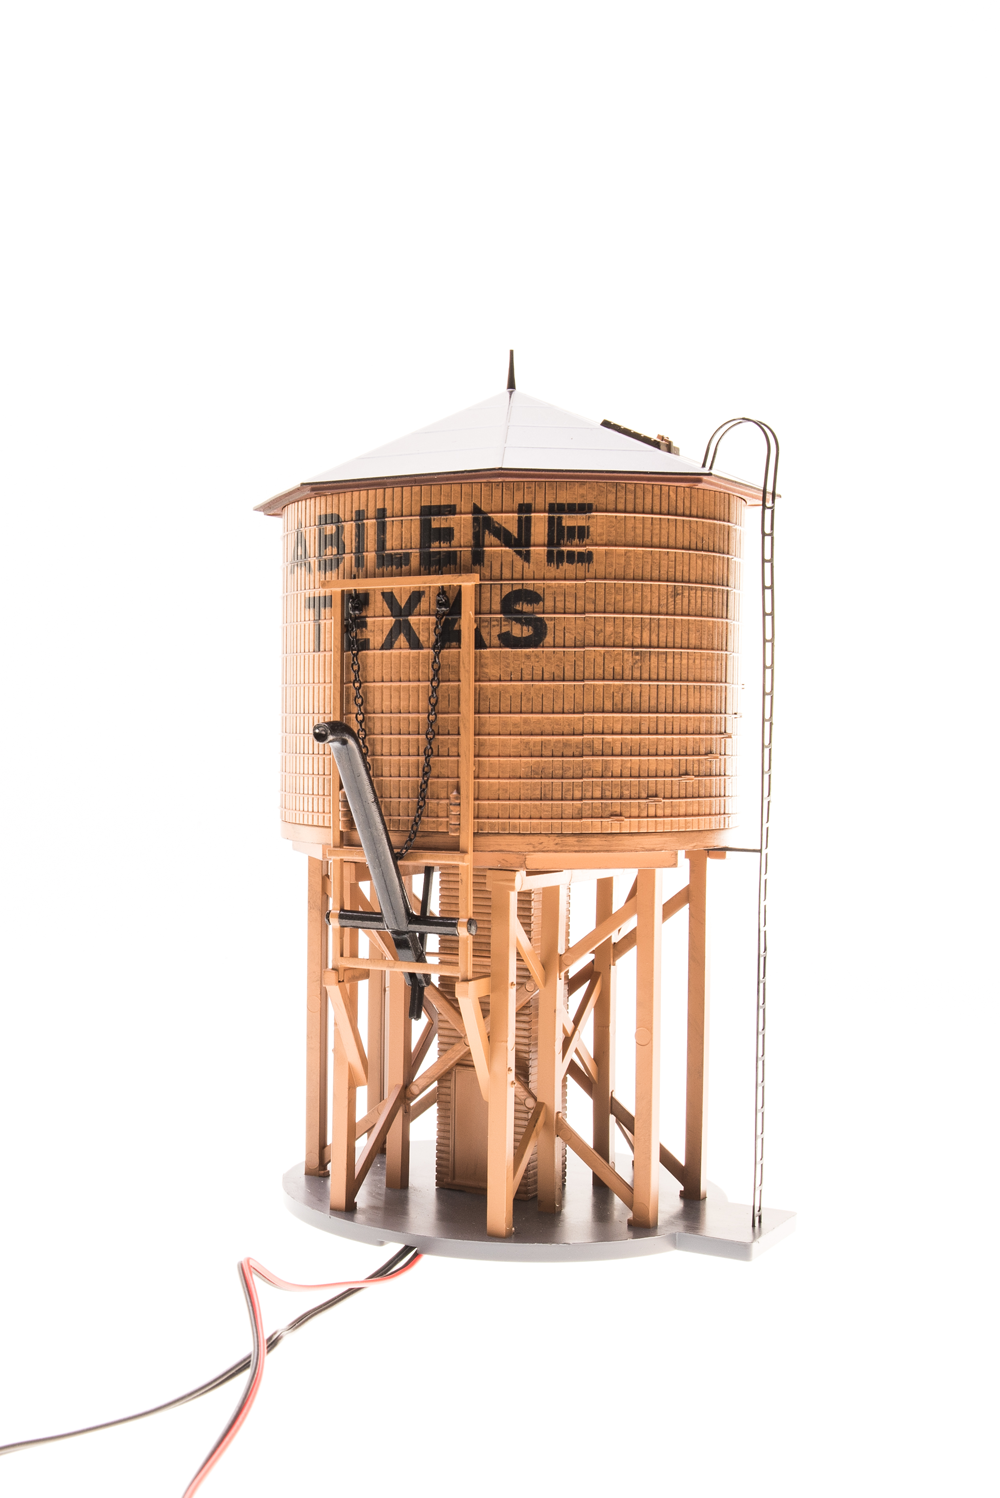 BLI-6096 Operating Water Tower w/ Sound, "City of Abilene", Weathered Brown, HO